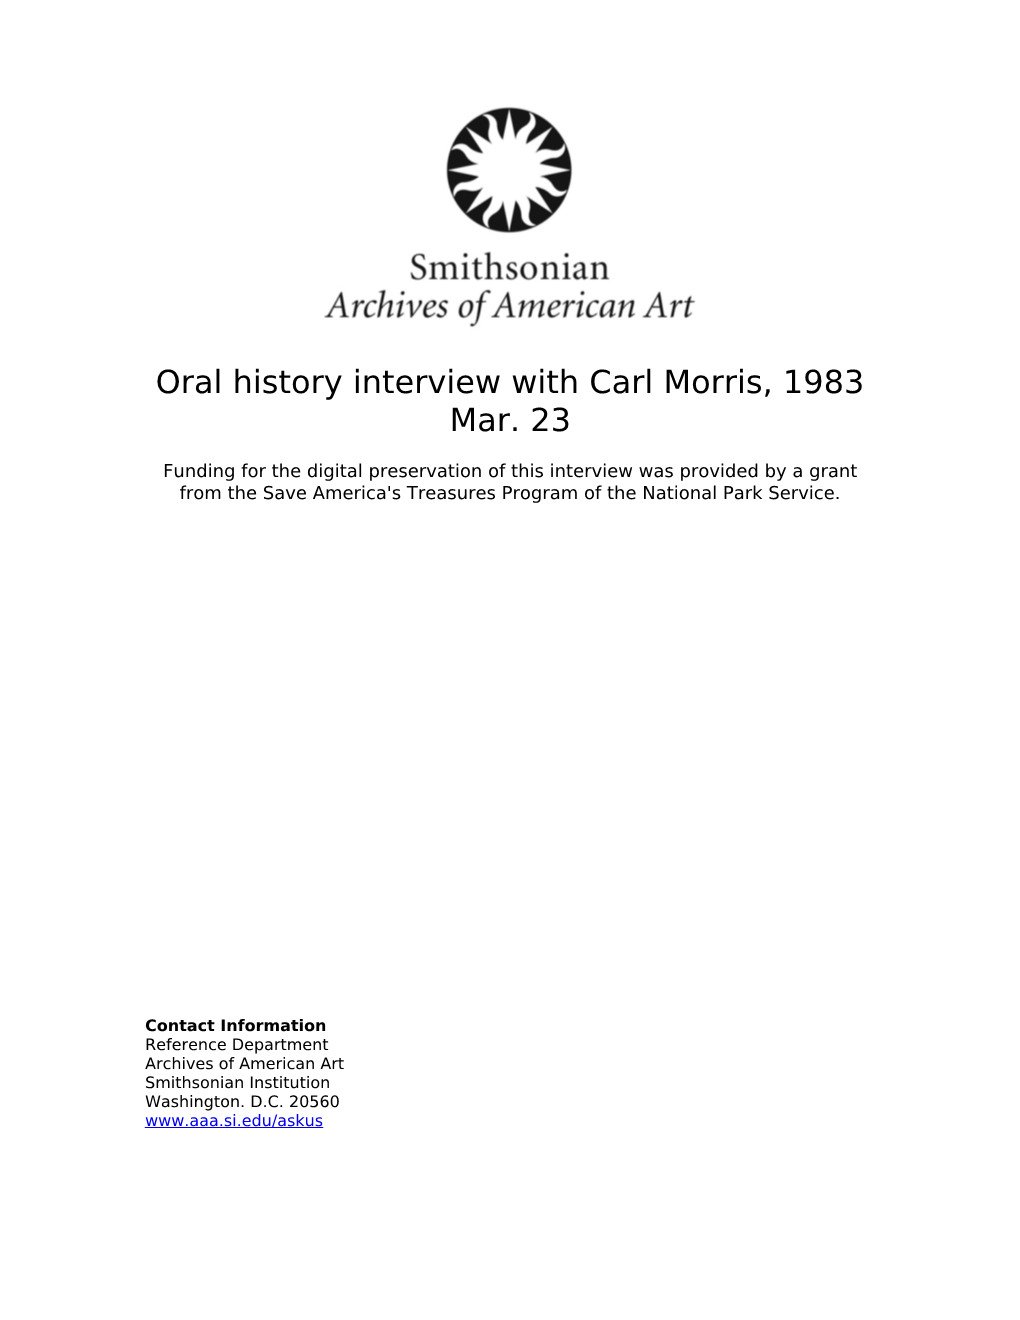 Oral History Interview with Carl Morris, 1983 Mar. 23